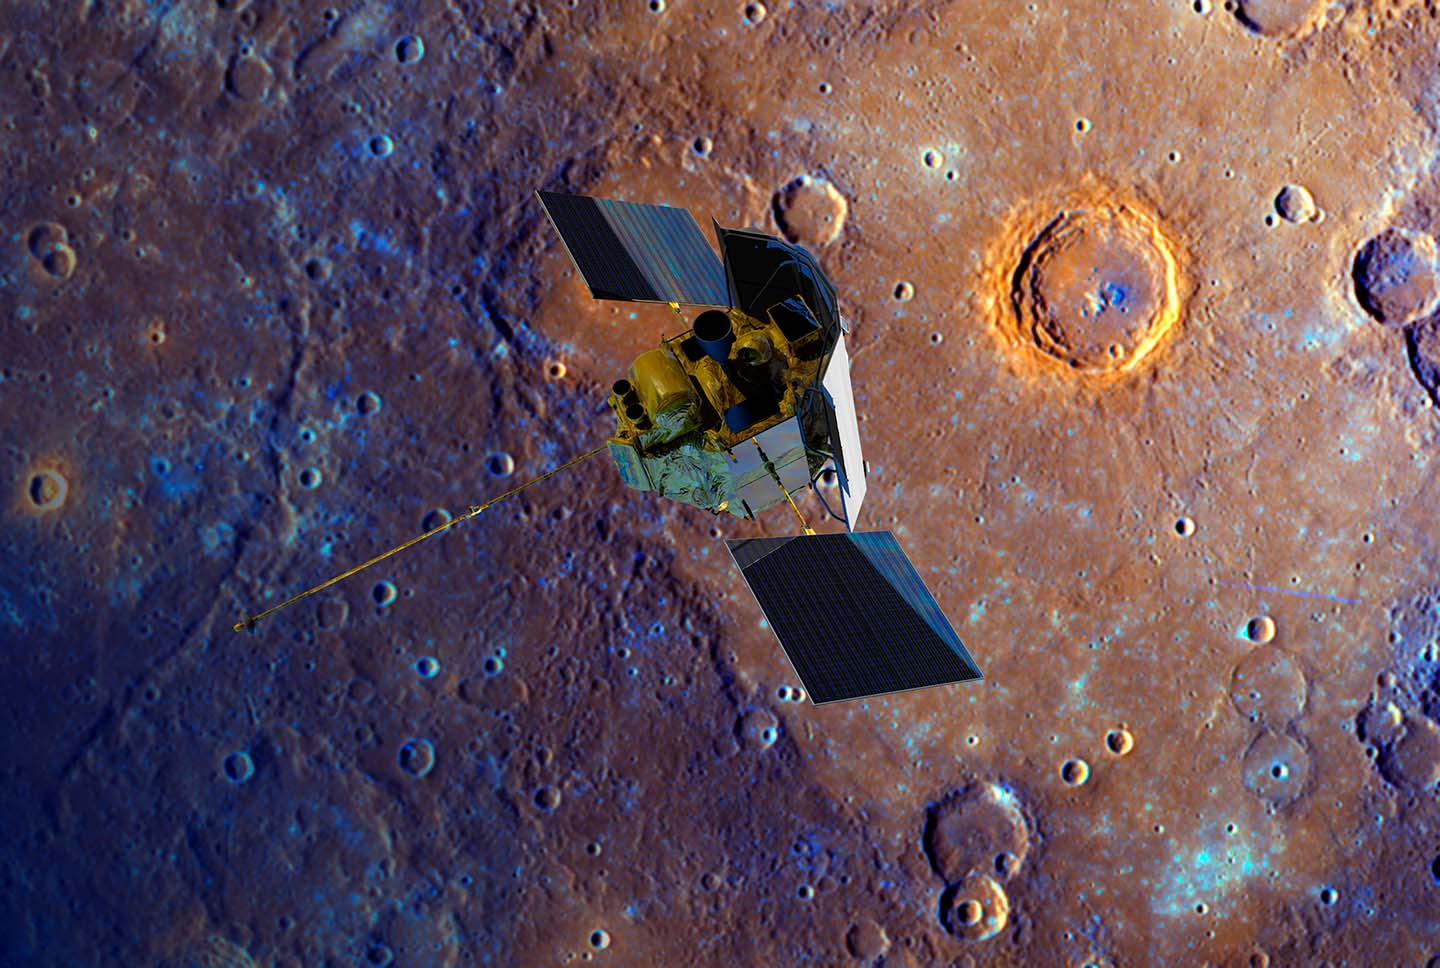 A depiction of the MESSENGER spacecraft flying over Mercury’s surface